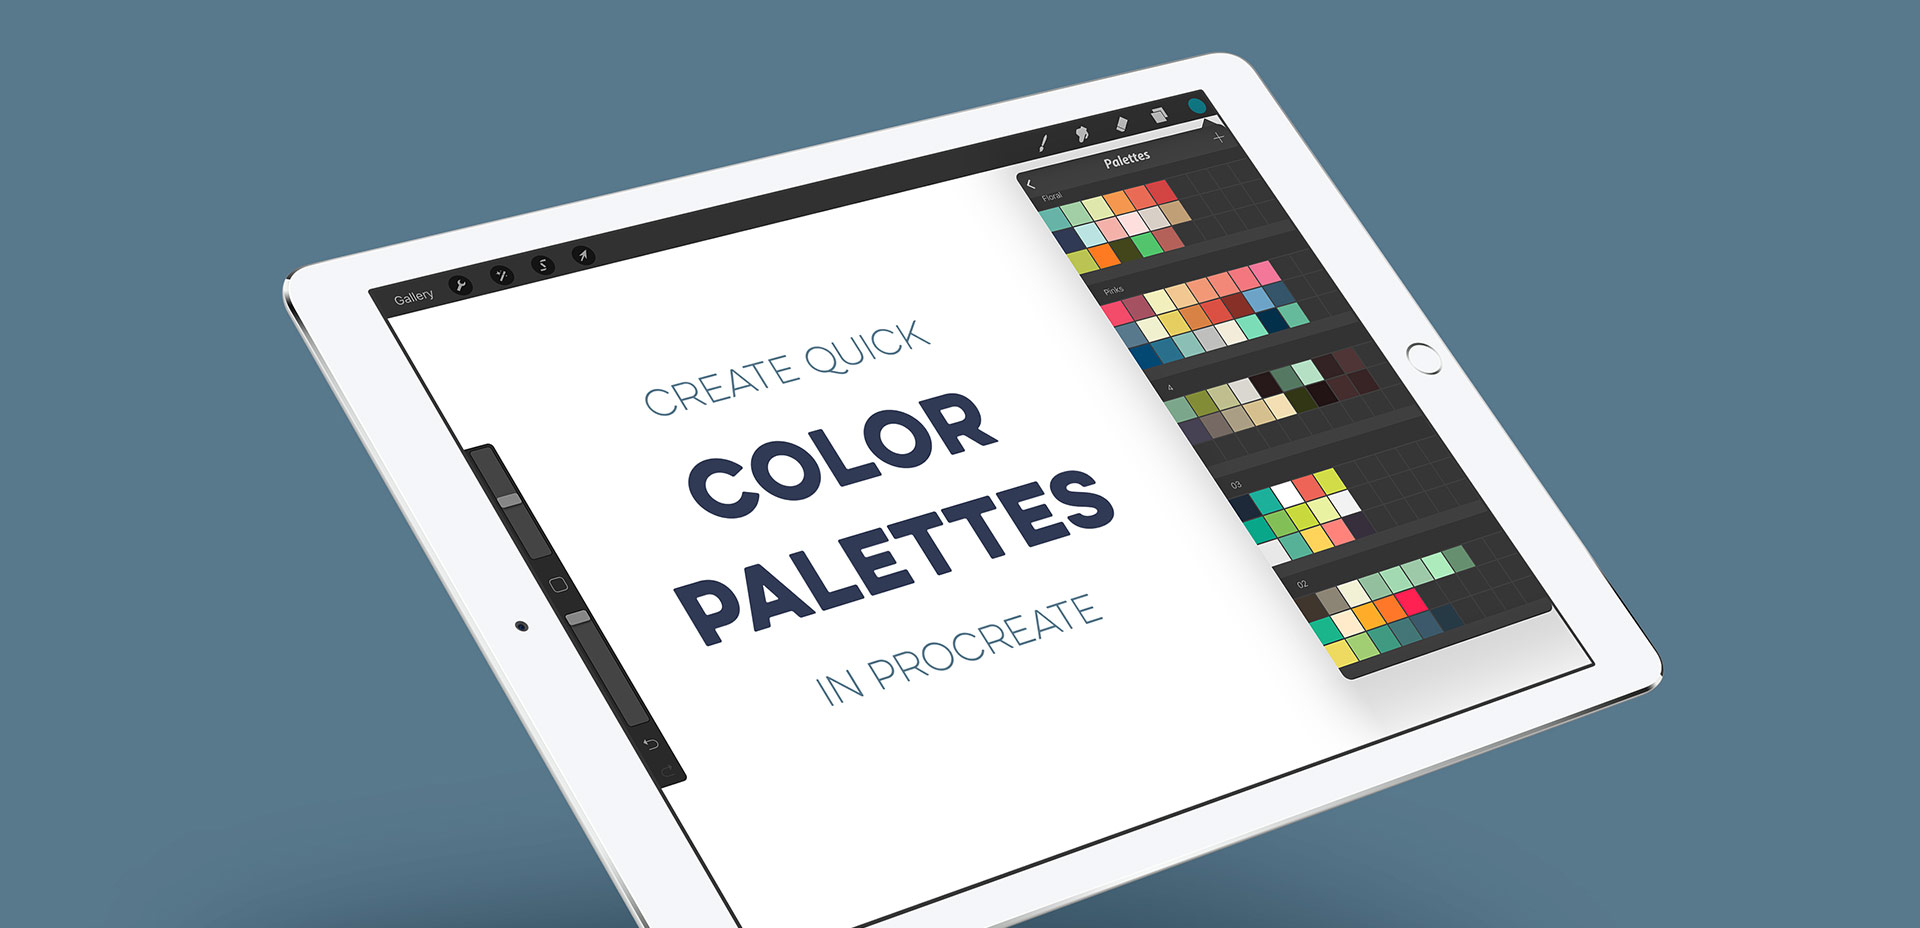 Create Quick Color Palettes In Procreate Every Tuesday